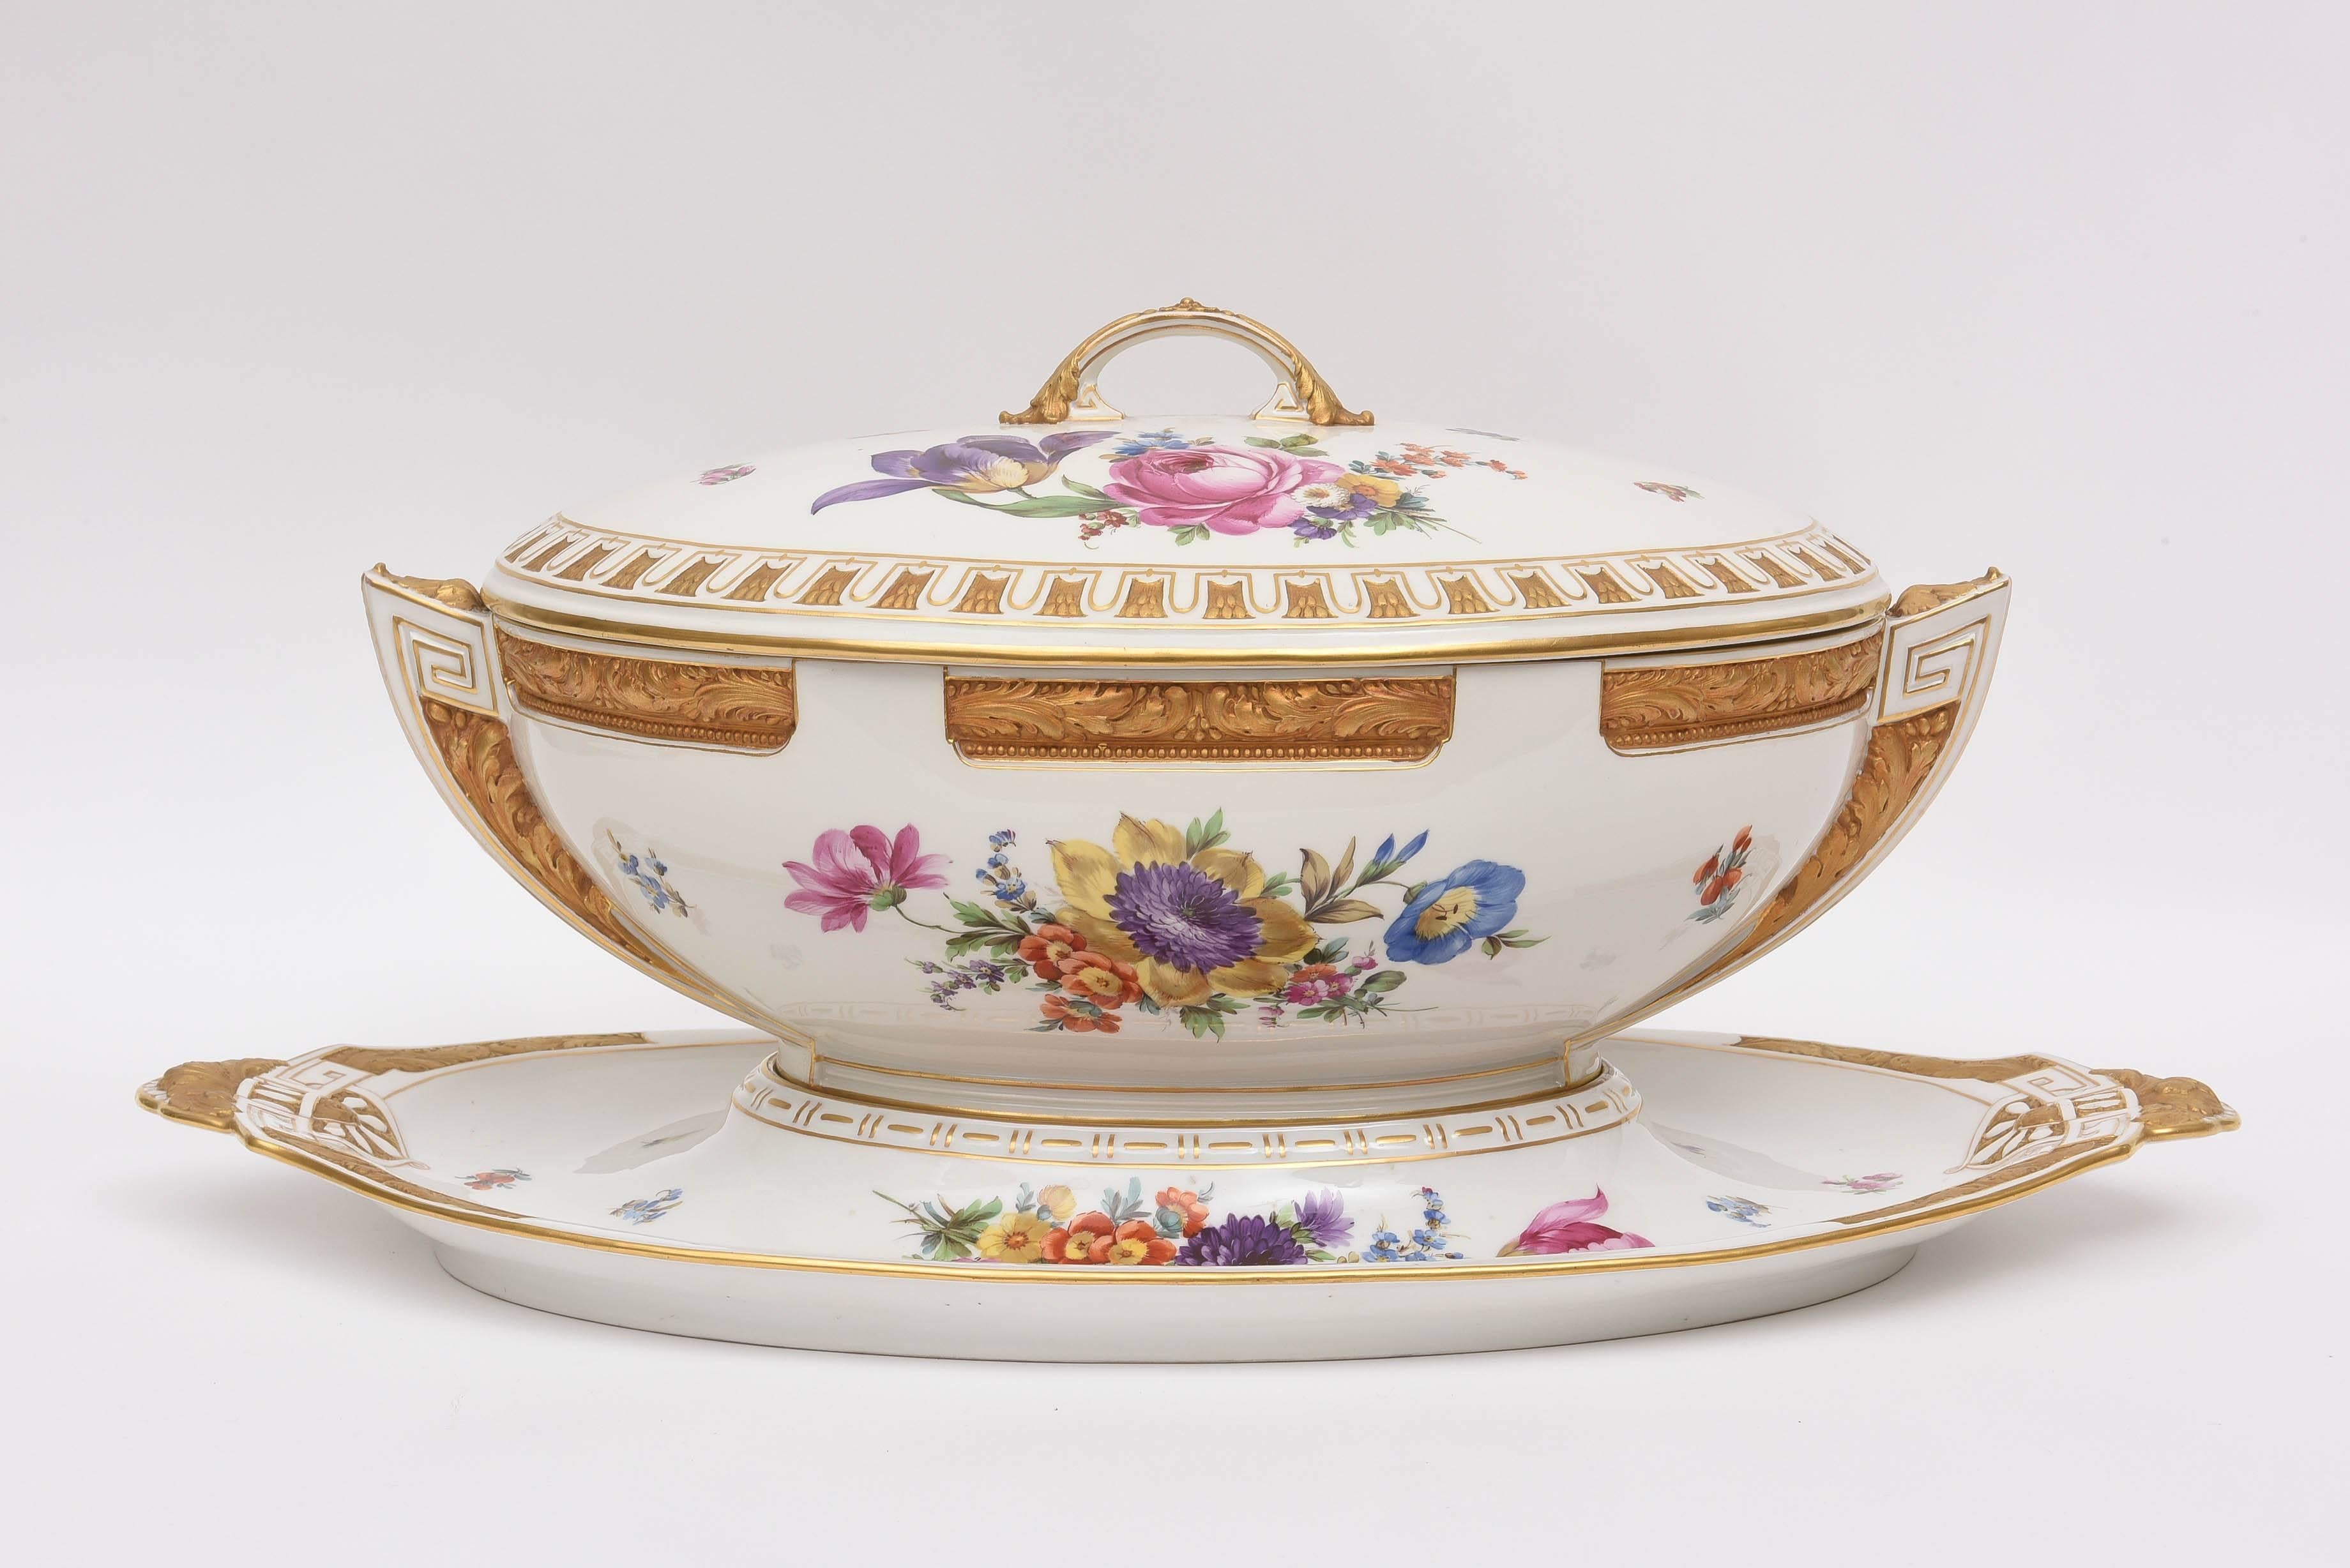 An oversized and grand 3 piece tureen, cover and fitted stand by KPM The Royal Factory of Berlin. Completely hand painted with heavy hand painted enamel florals and gold. A very detailed porcelain 